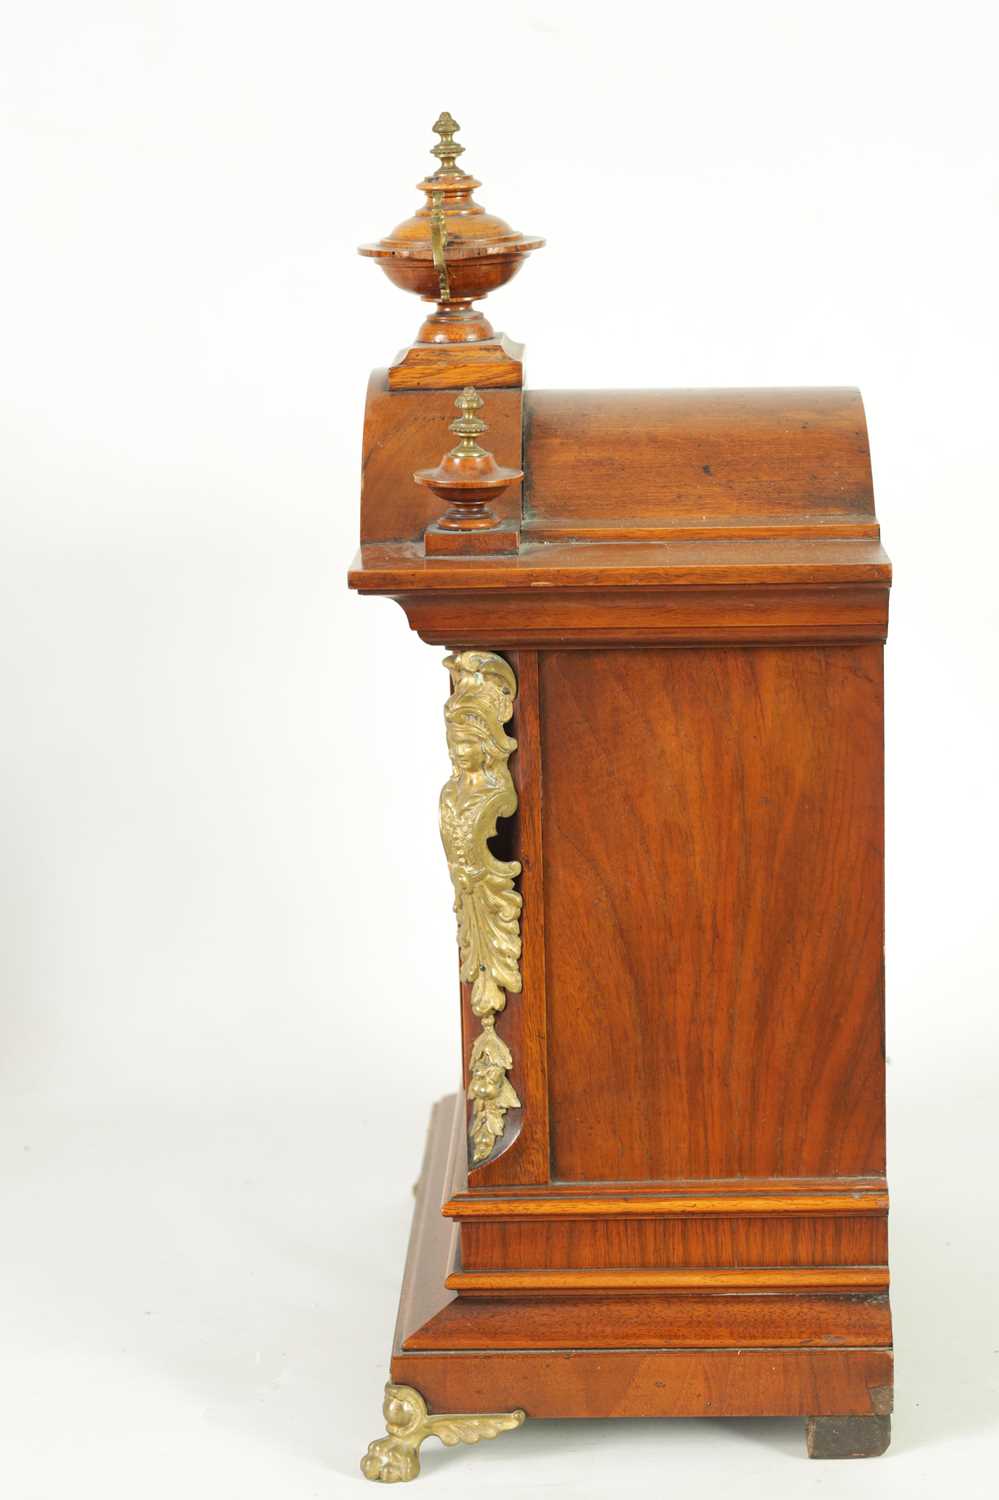 A LATE 19TH CENTURY GERMAN JUNGHANS WALNUT MANTEL CLOCK - Image 9 of 13